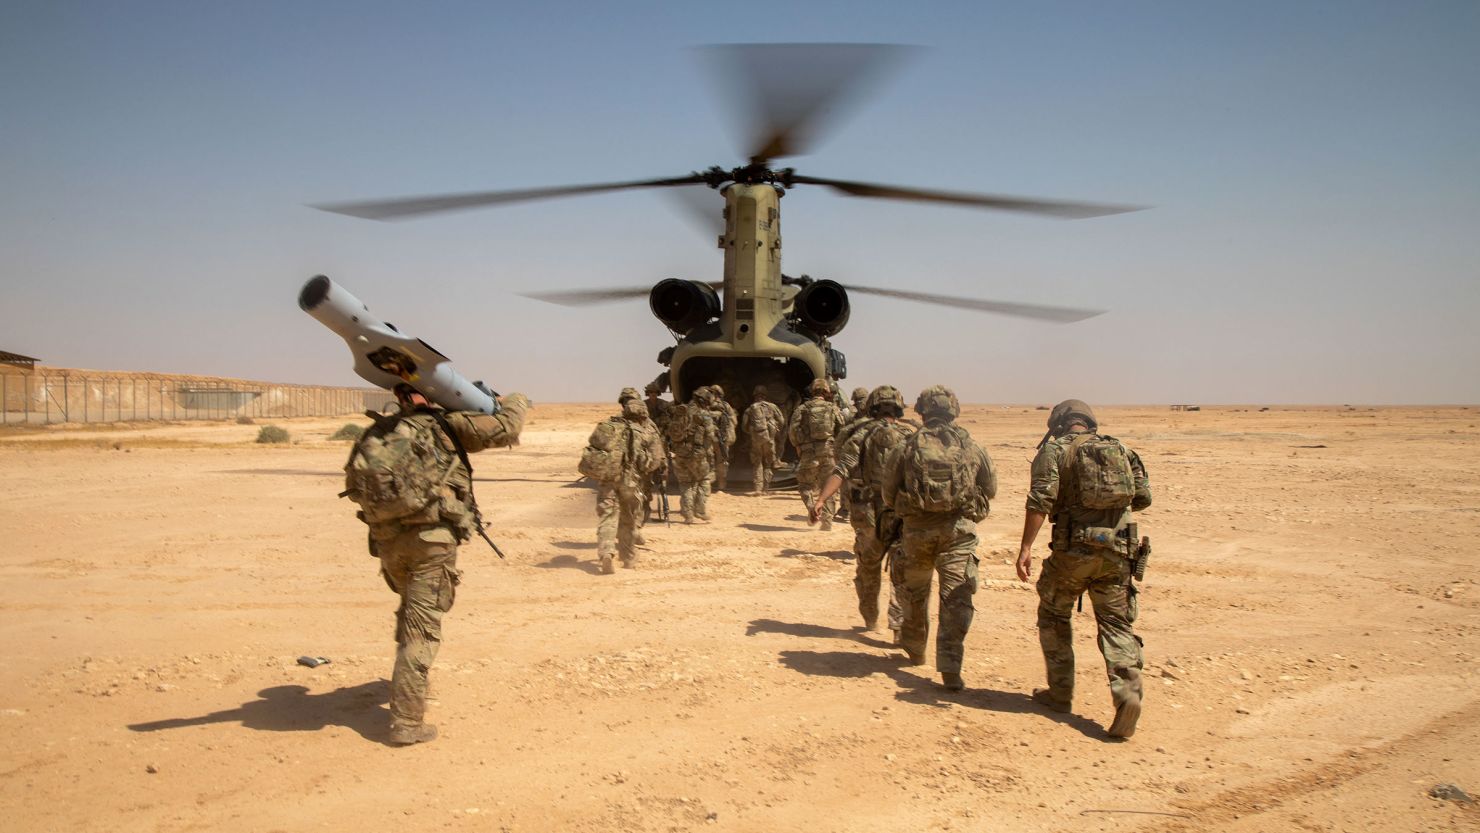 In this photo from the US Army, US Army Soldiers, assigned to 37th Infantry Brigade Combat Team, 125th Infantry Regiment, 1st Battalion, Combined Joint Task Force Operation Inherent Resolve, board a CH-47 Chinook helicopter after a live-fire exercise at Al Asad Air Base, Iraq, in July 2023.